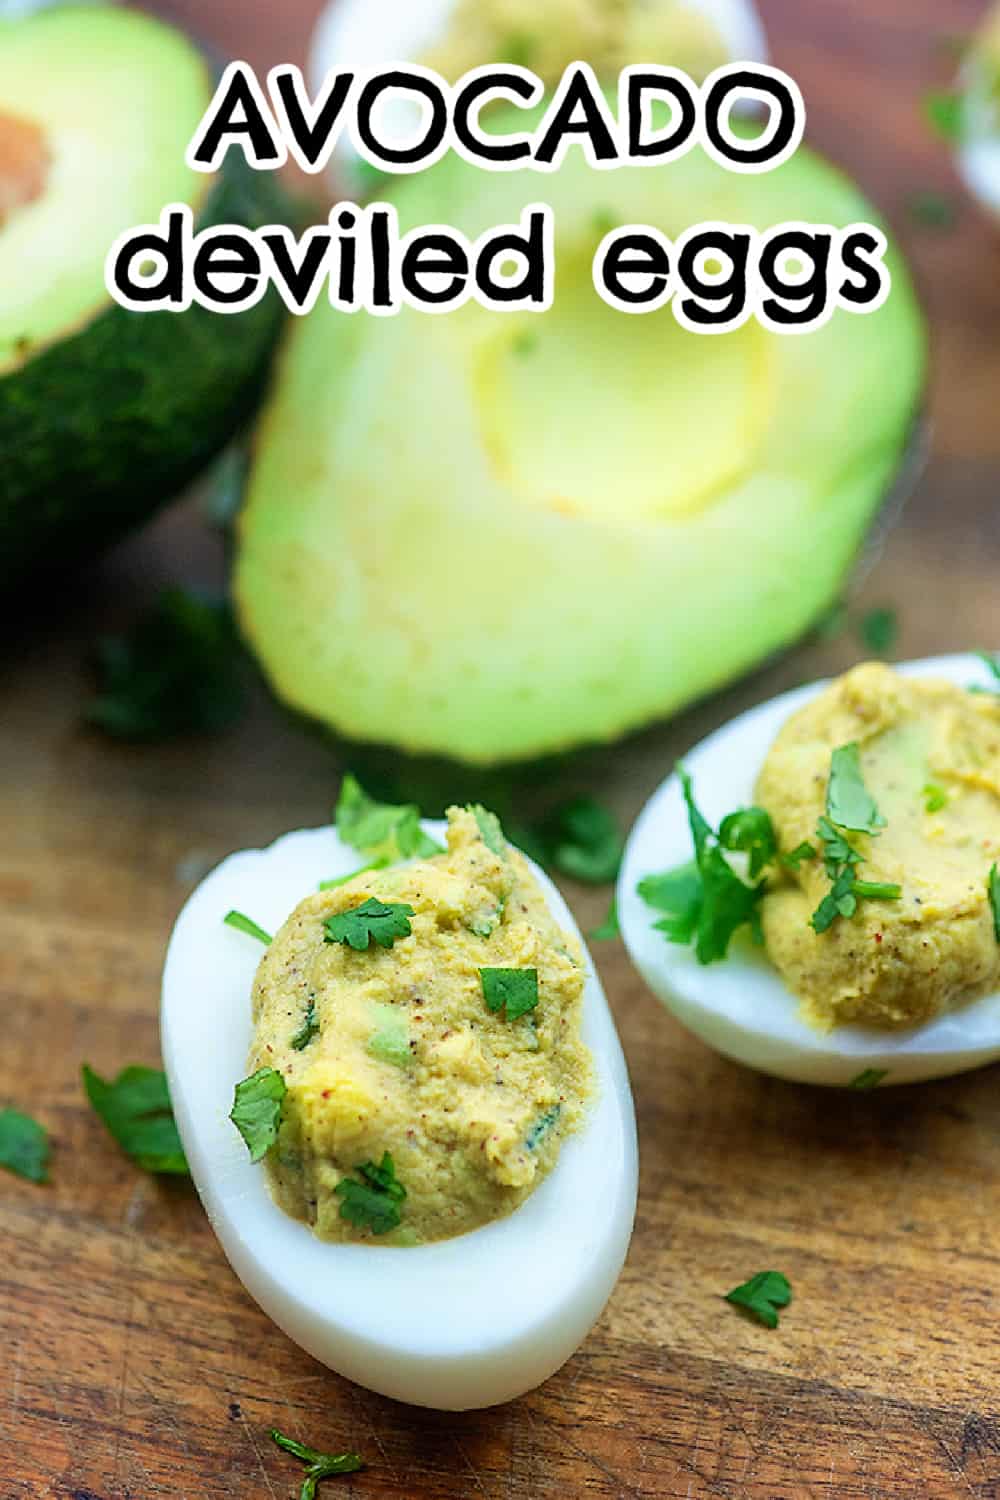 Deviled egg made with avocado instead of mayonnaise.